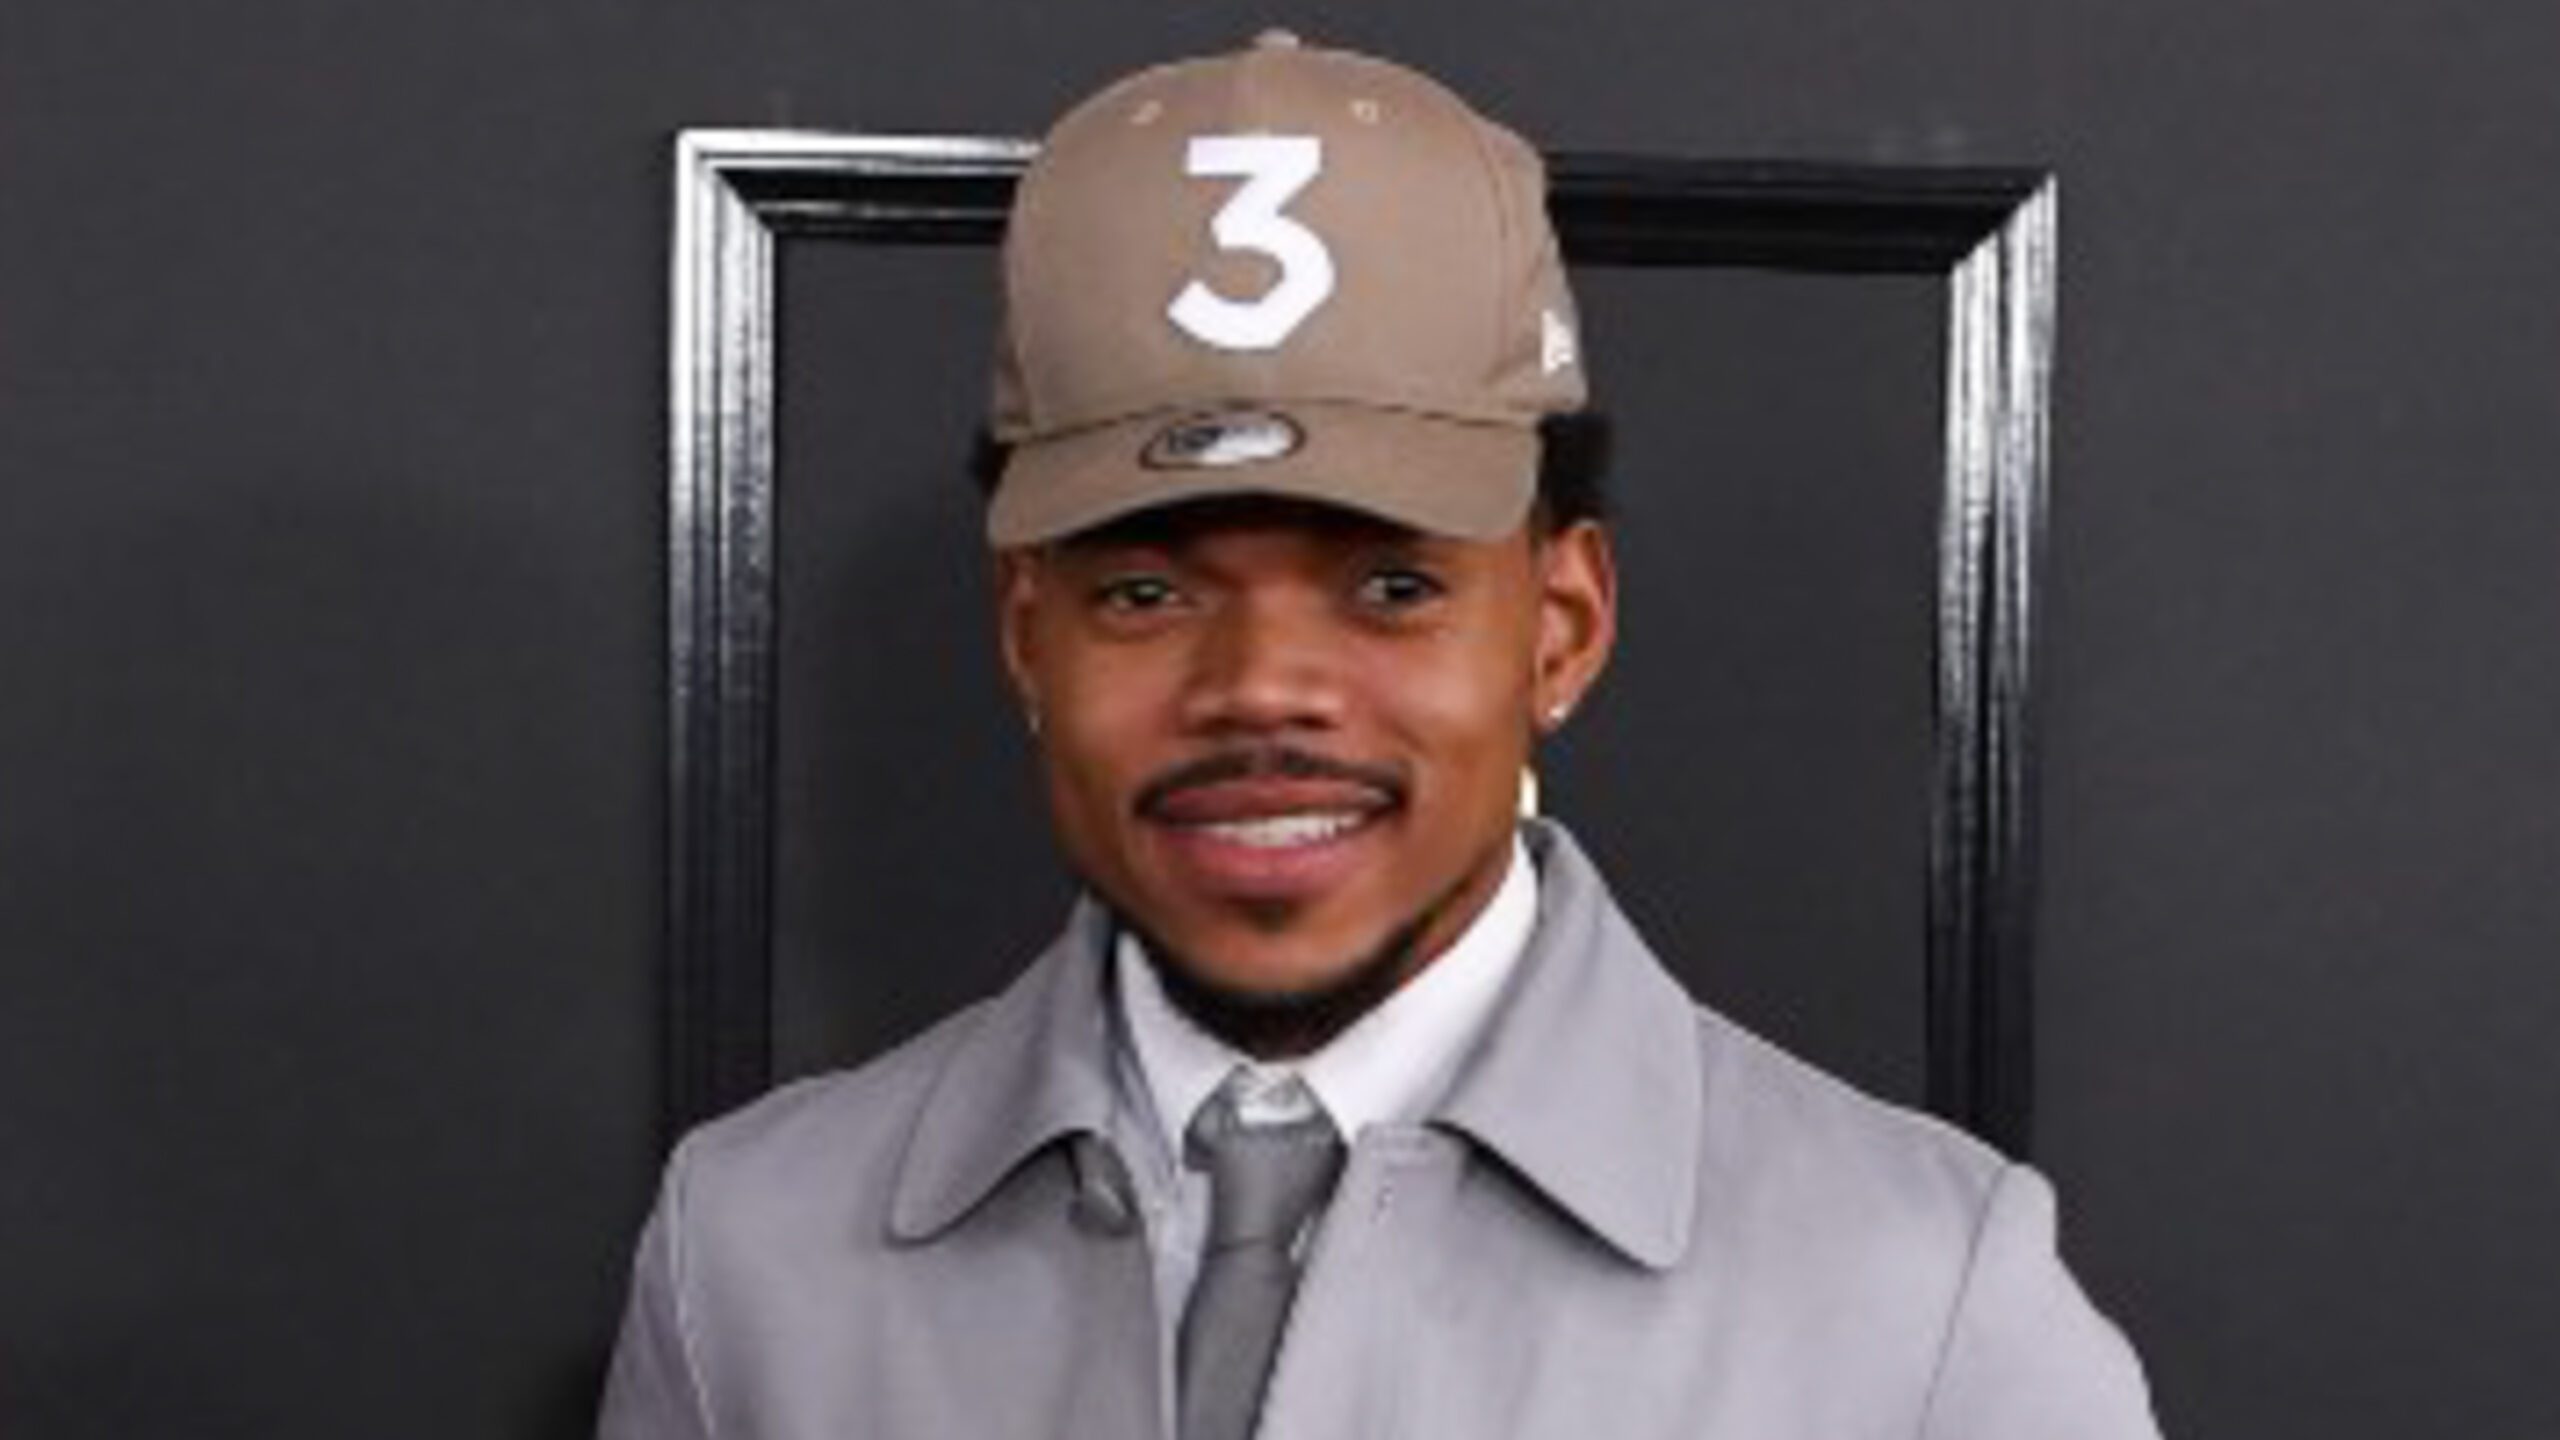 Chance the Rapper gives $1 million amid Chicago school row